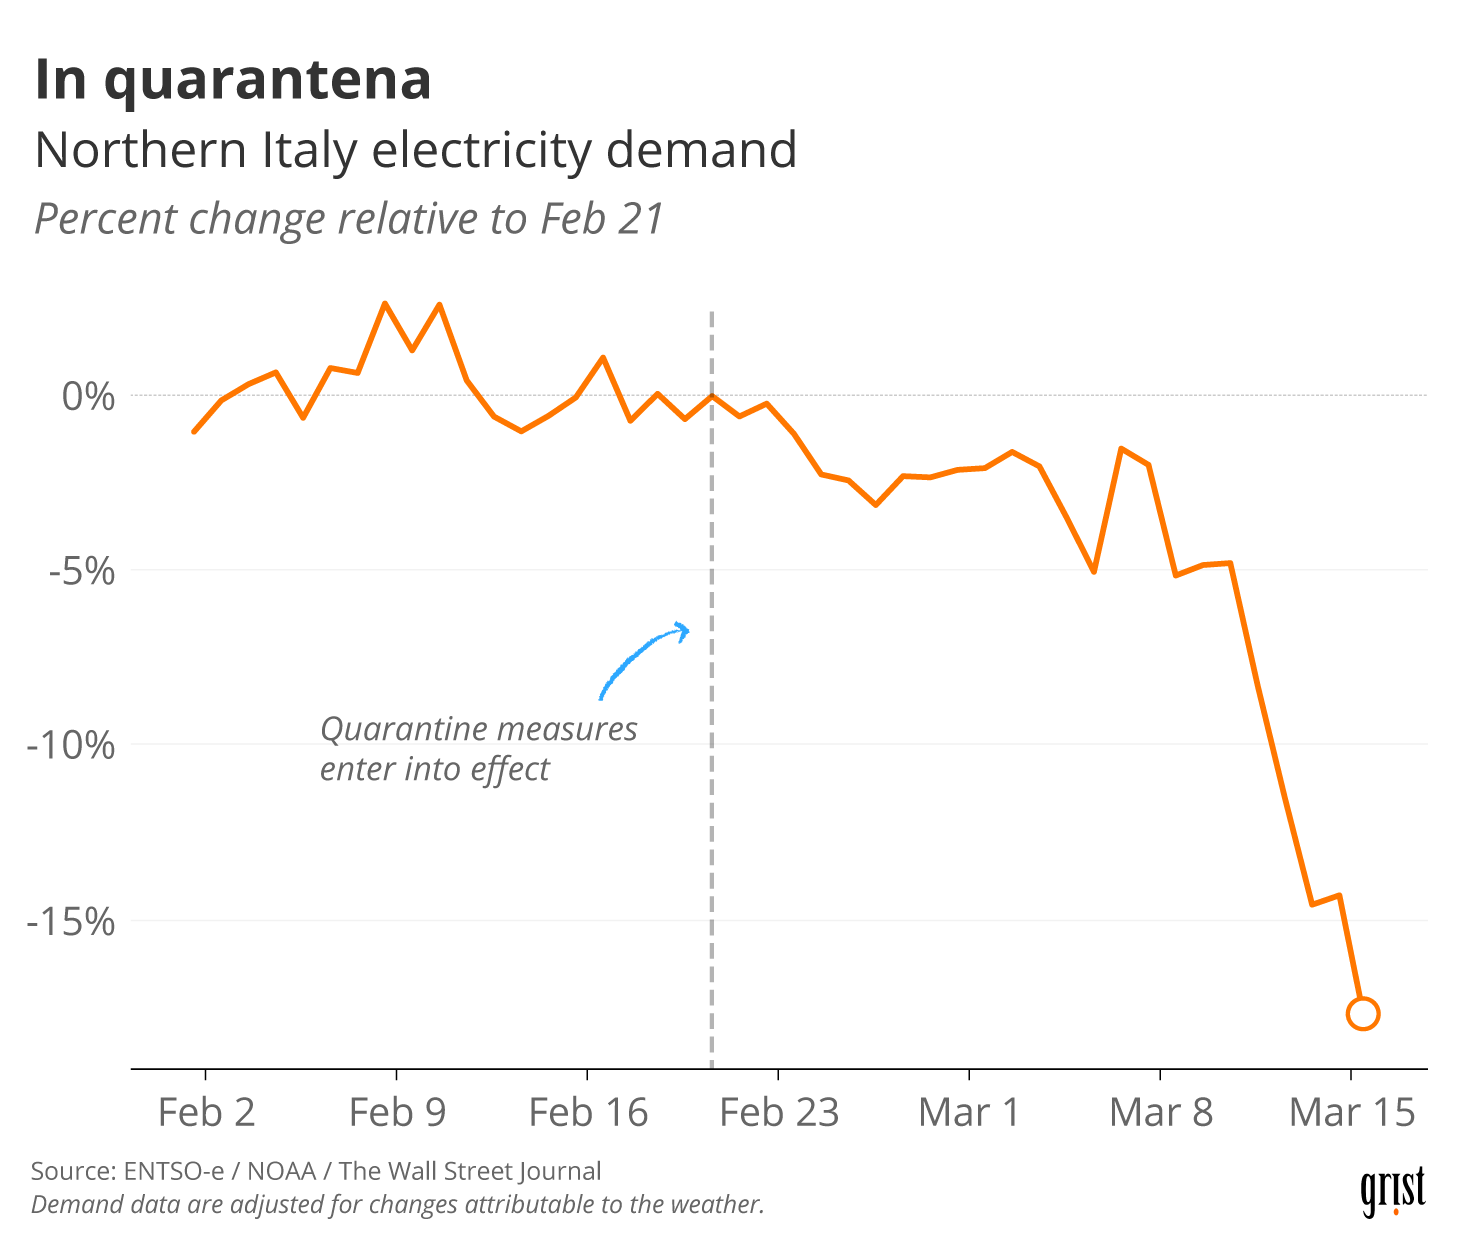 A line chart showing the percent change in Northern Italy electricity demand relative to Feb 21, 2020 (when quarantine measures entered into effect). By mid-March, demand had fallen 18%.